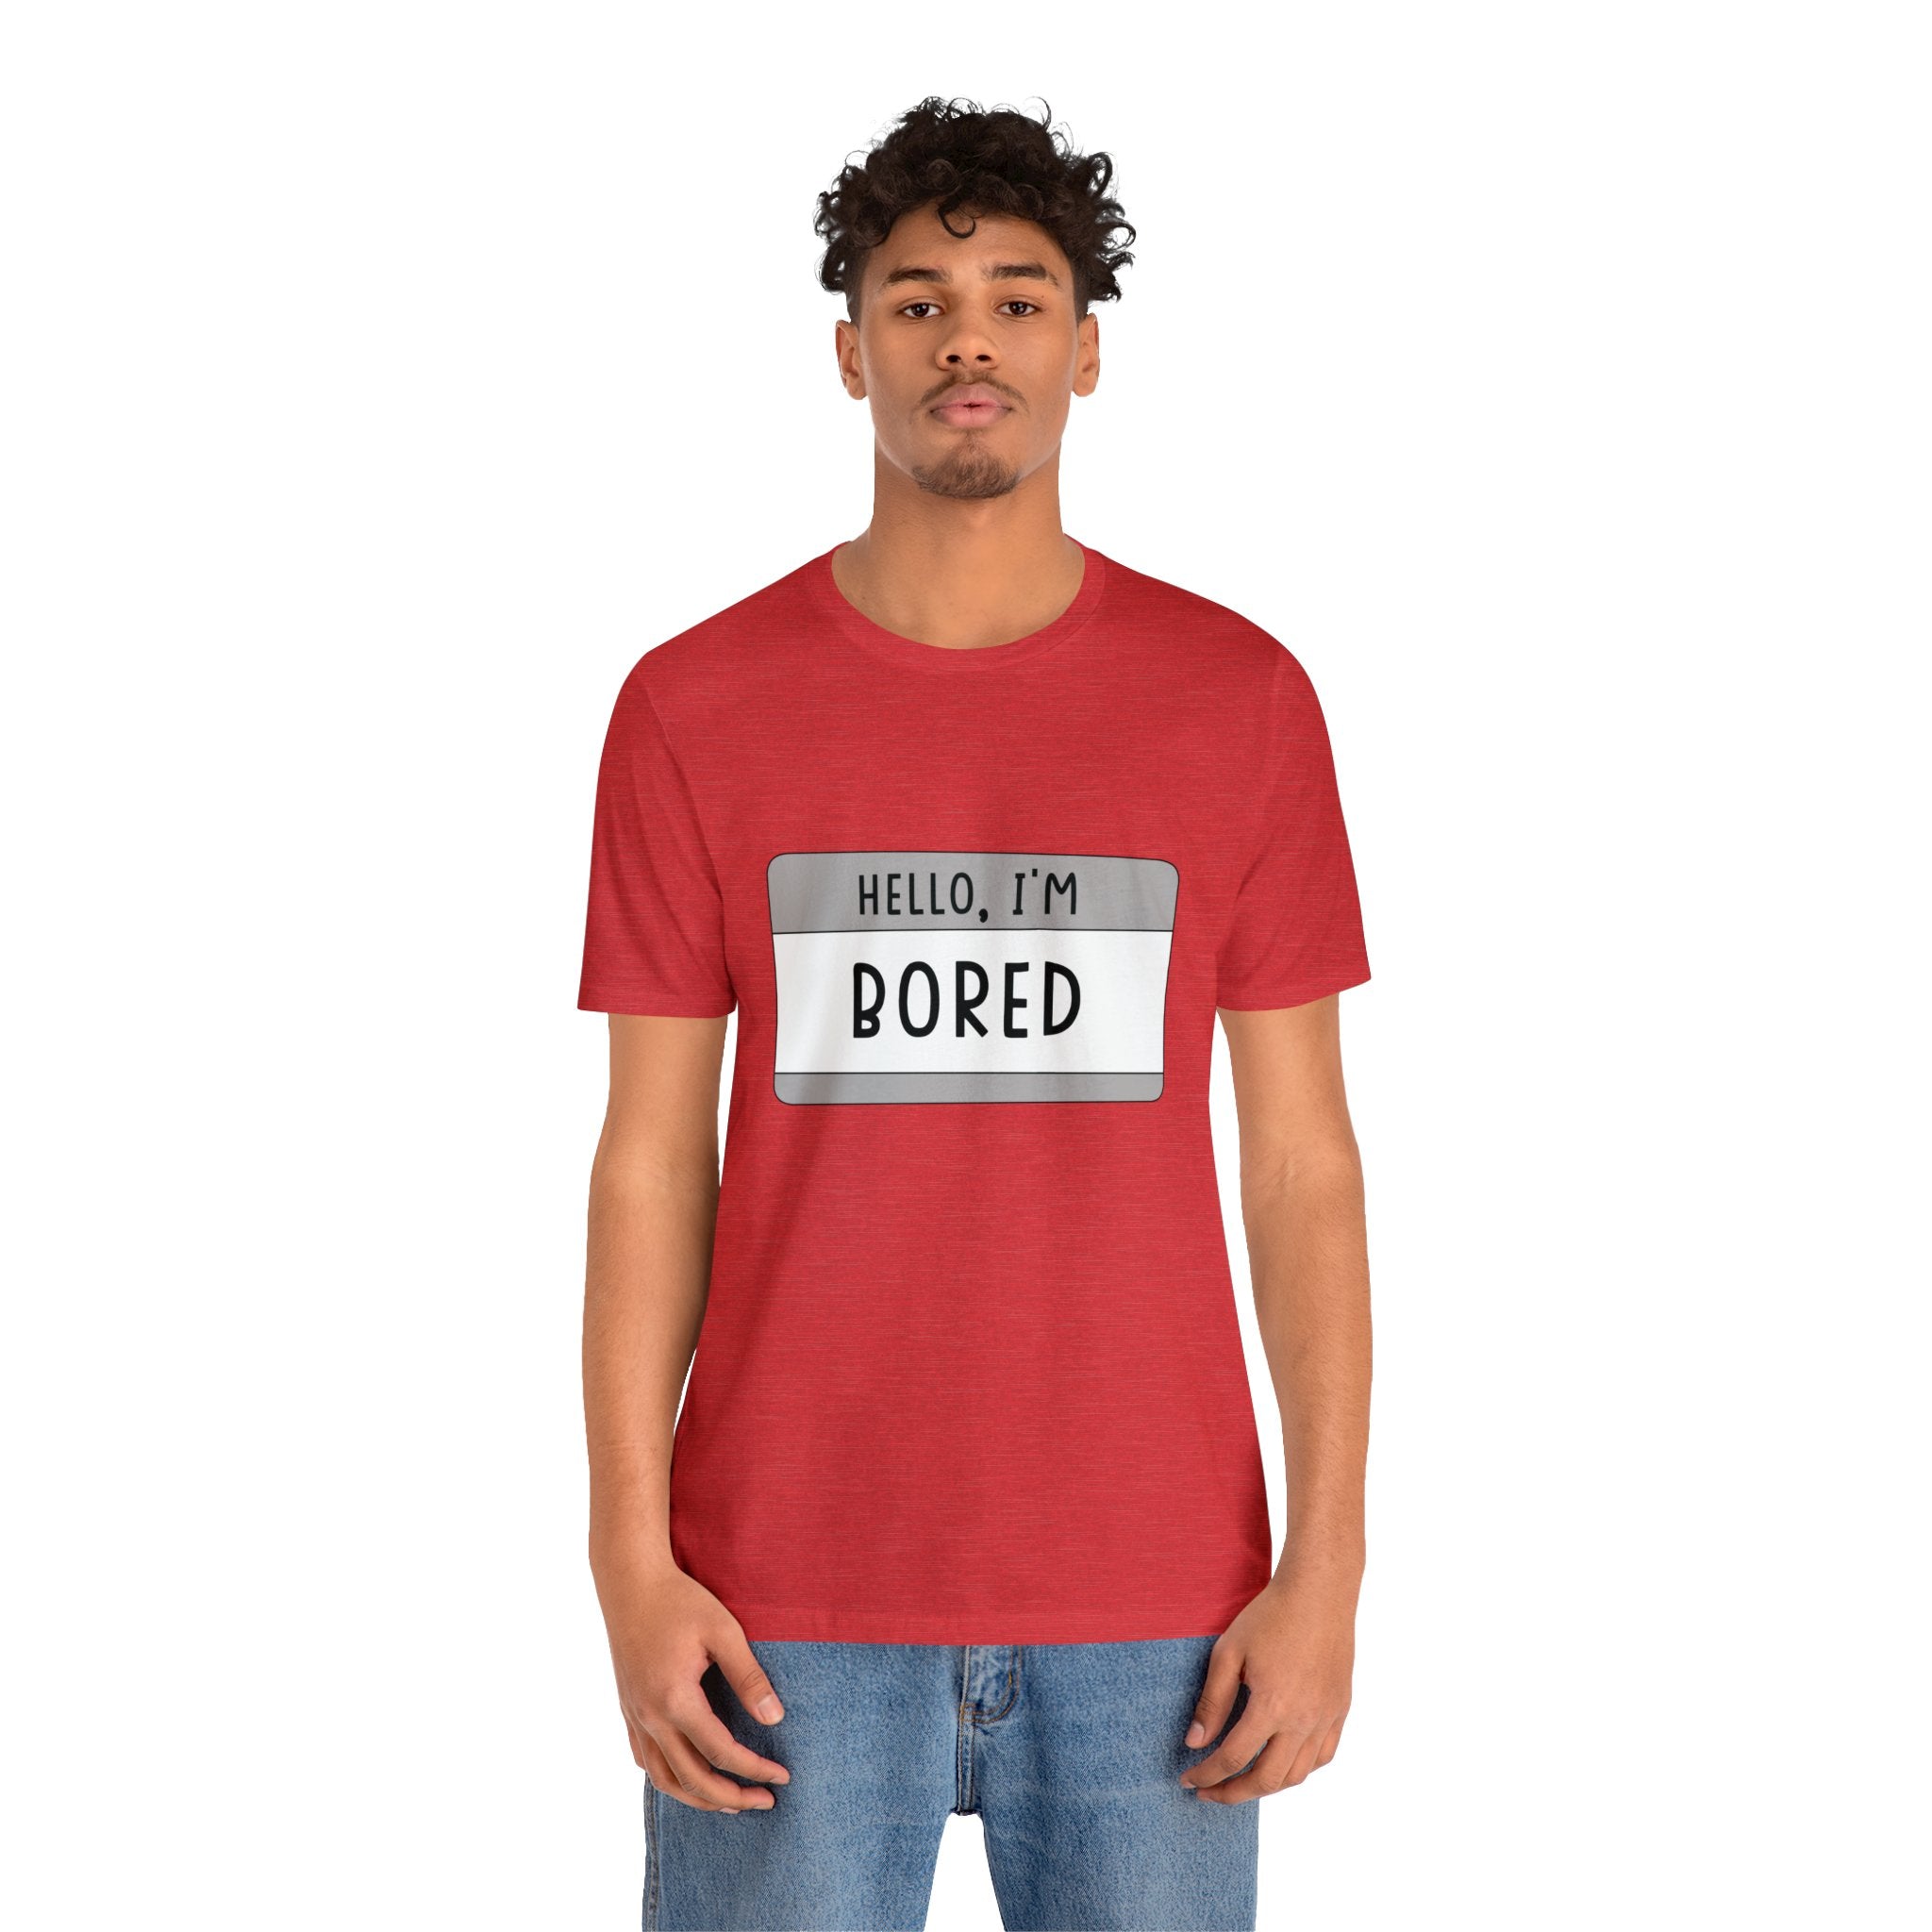 Sentence with replaced product name: A man in a red Hello, I'm Board T-Shirt stands out in the crowd.